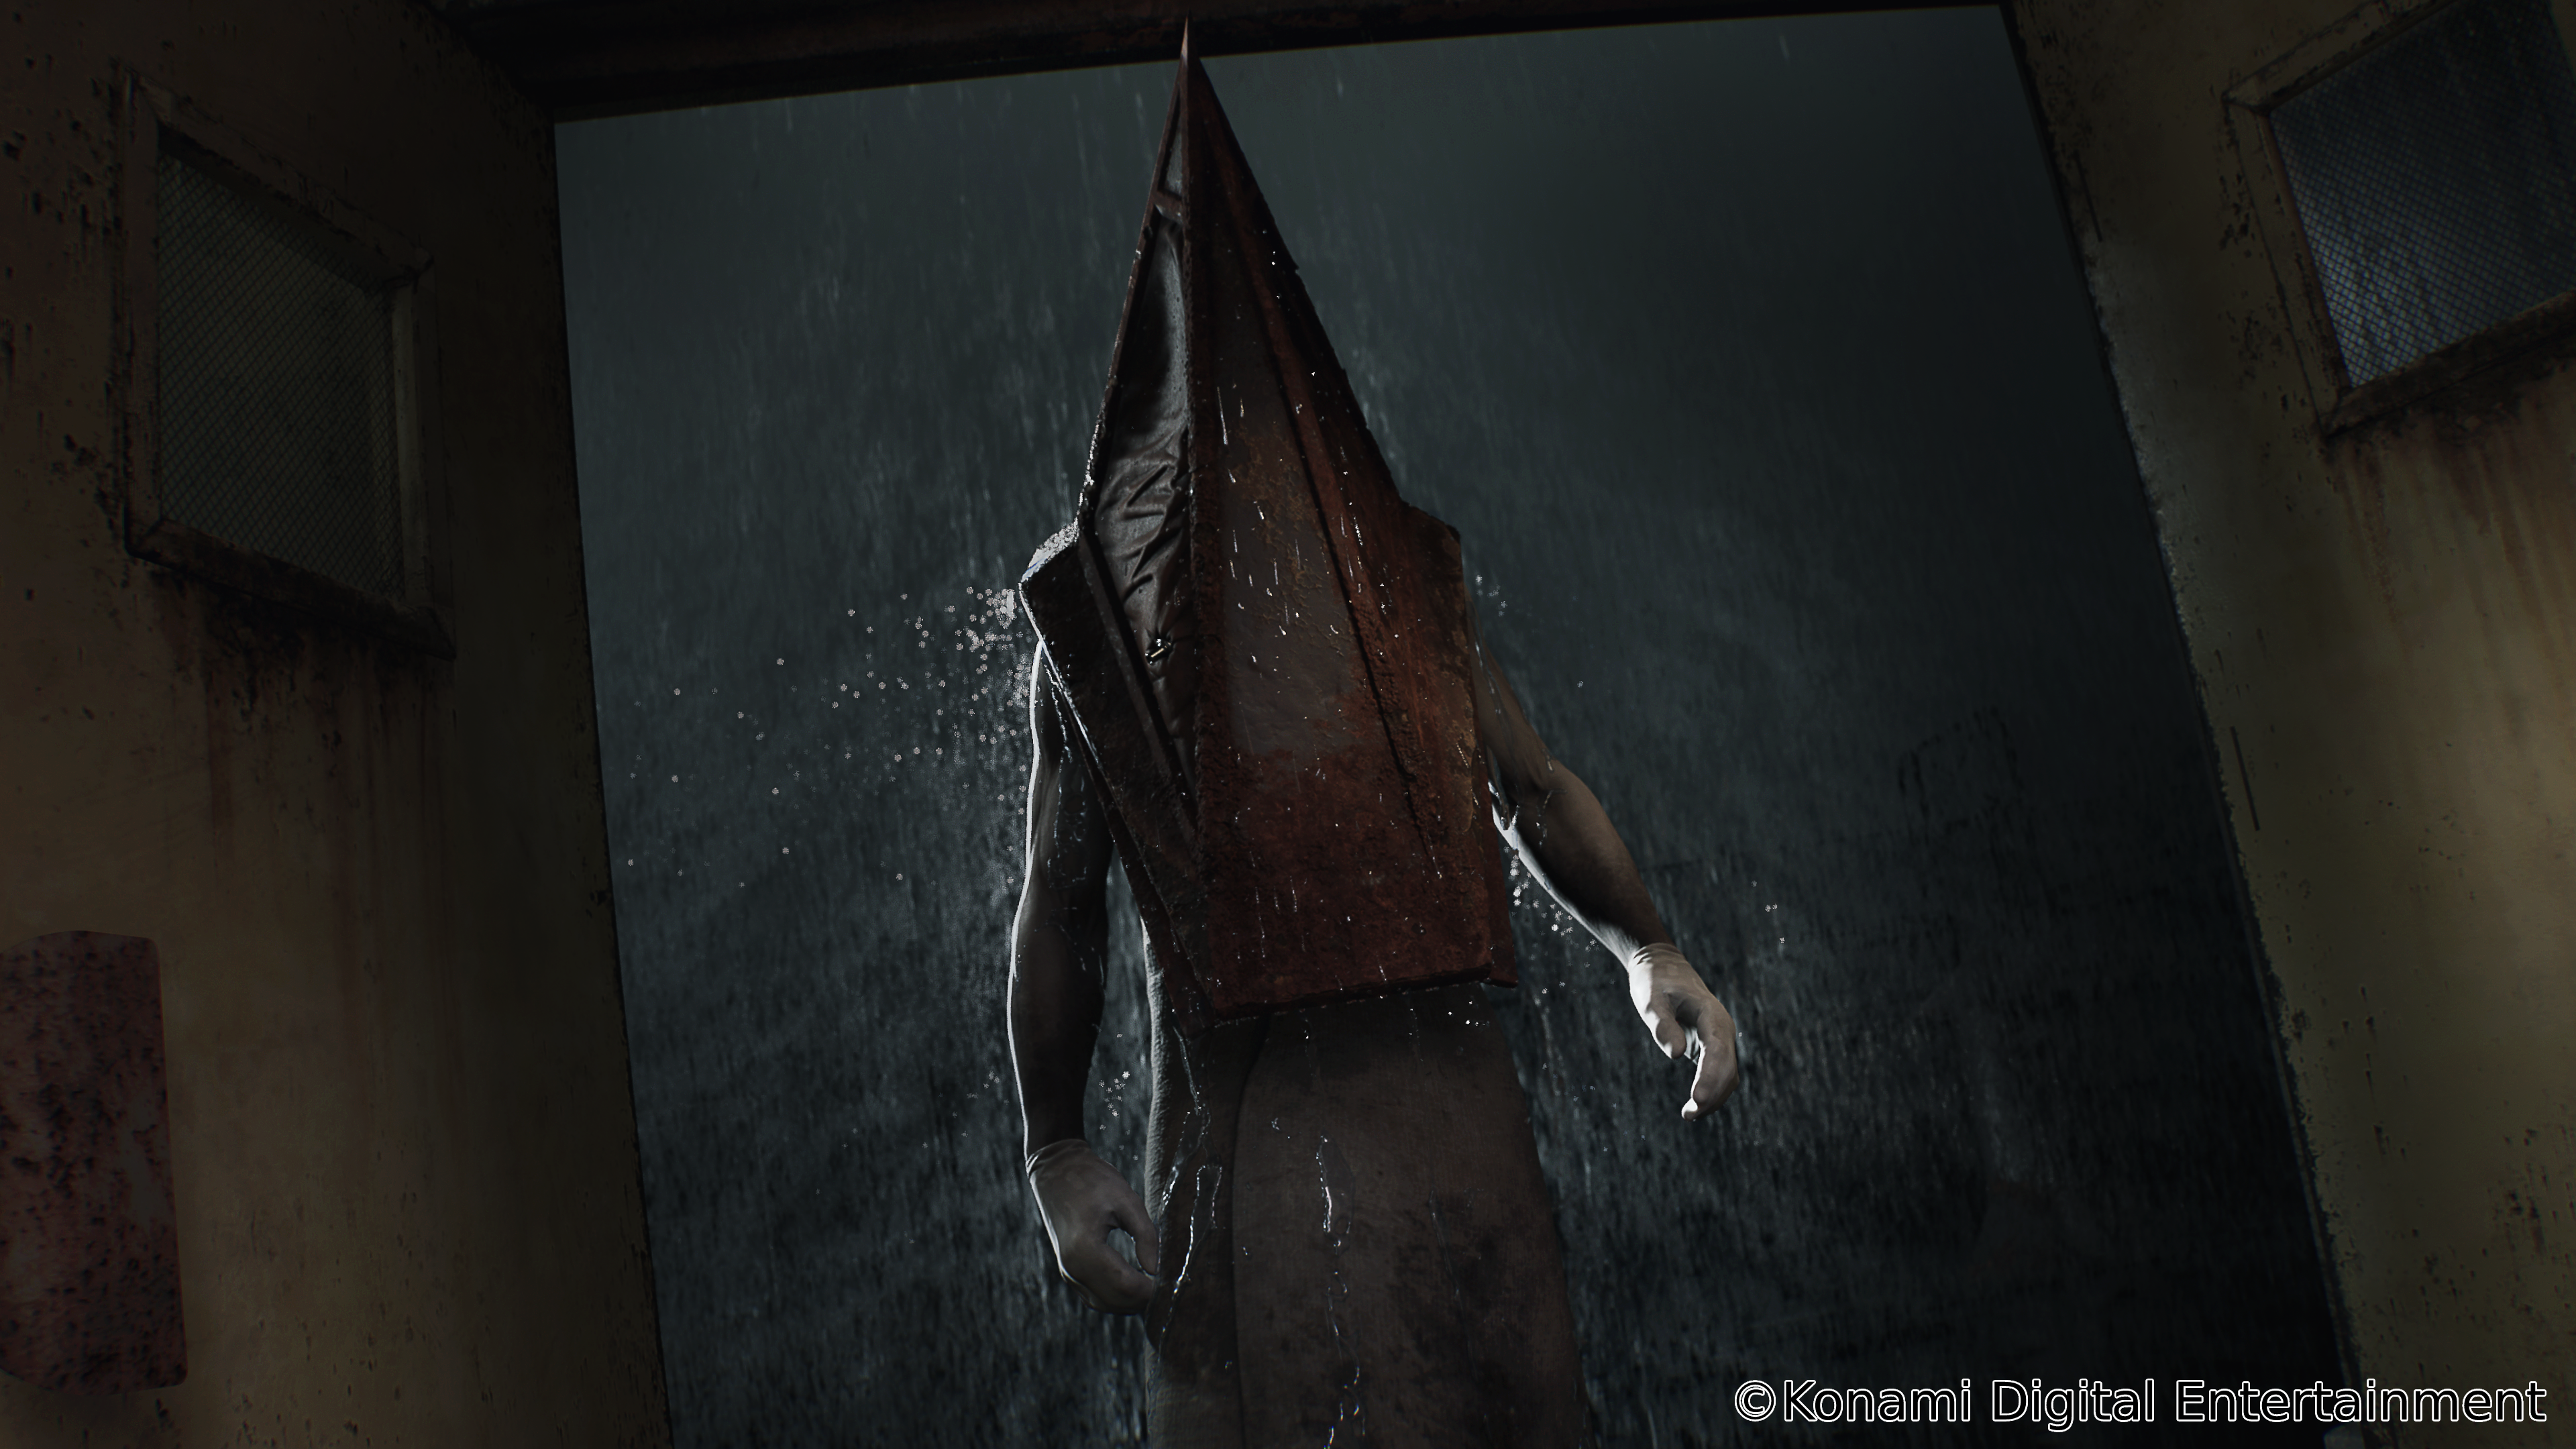 Pyramid Head stands in the doorway, as a downpour showers it via Silent Hill 2 (TBA), Konami